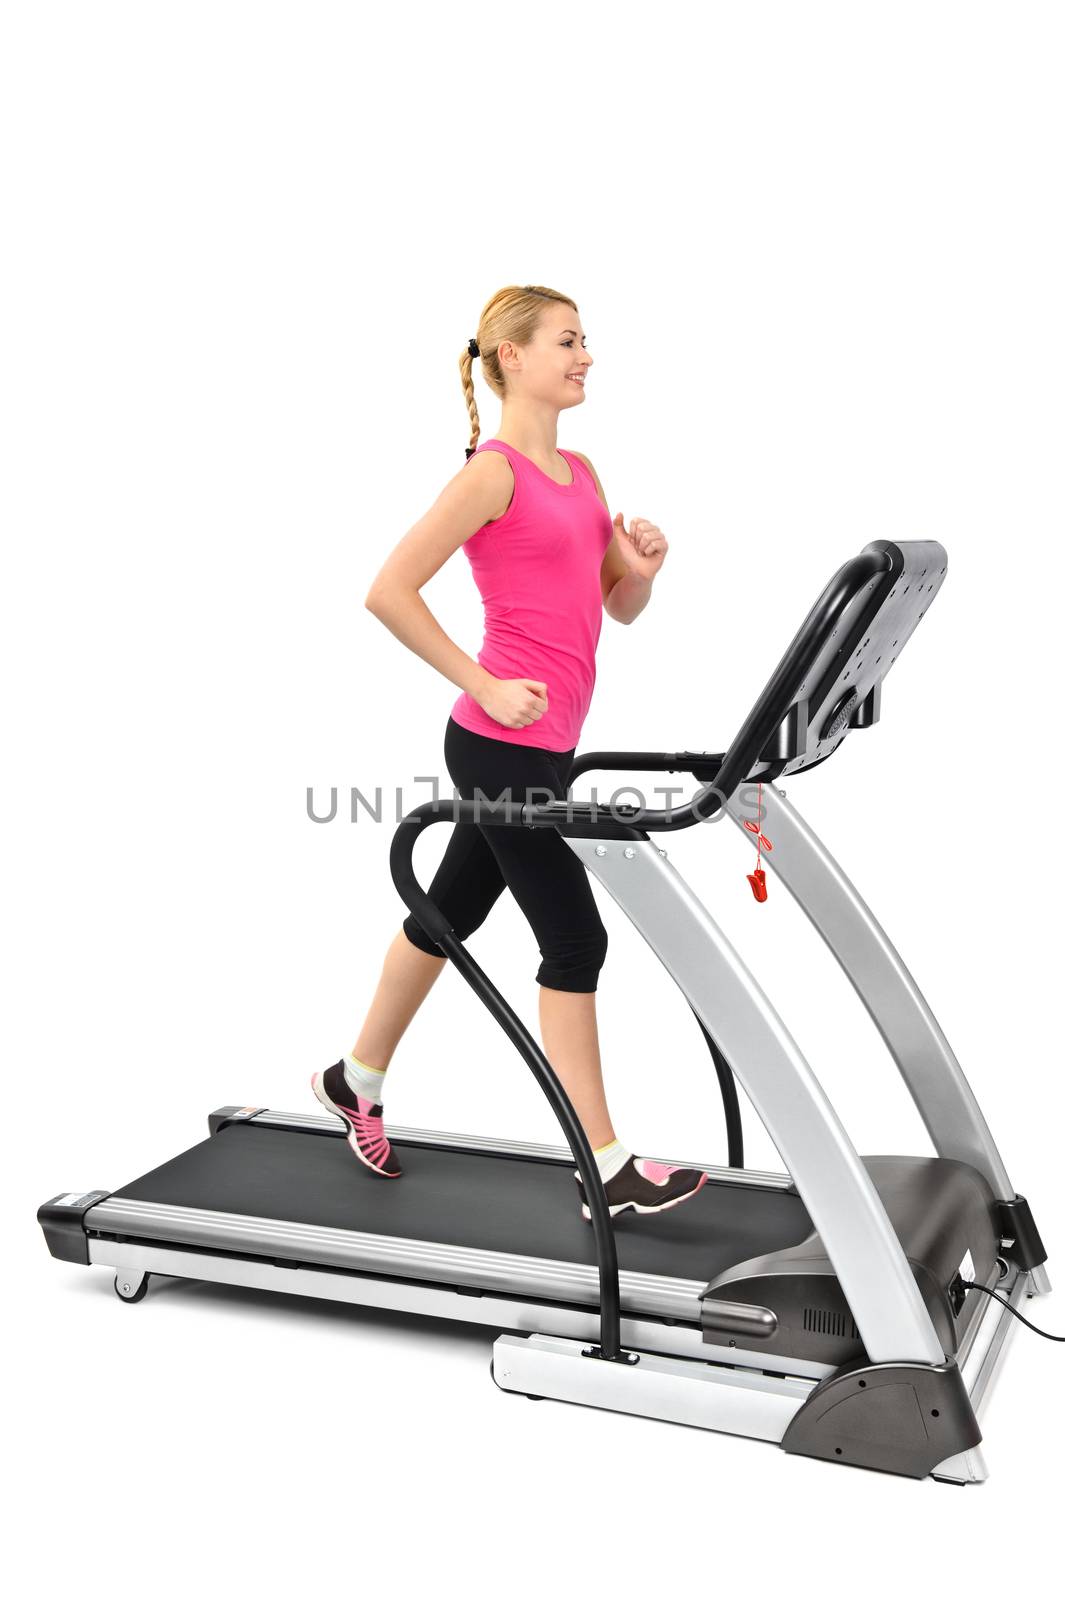 young woman doing exercises on treadmill by starush